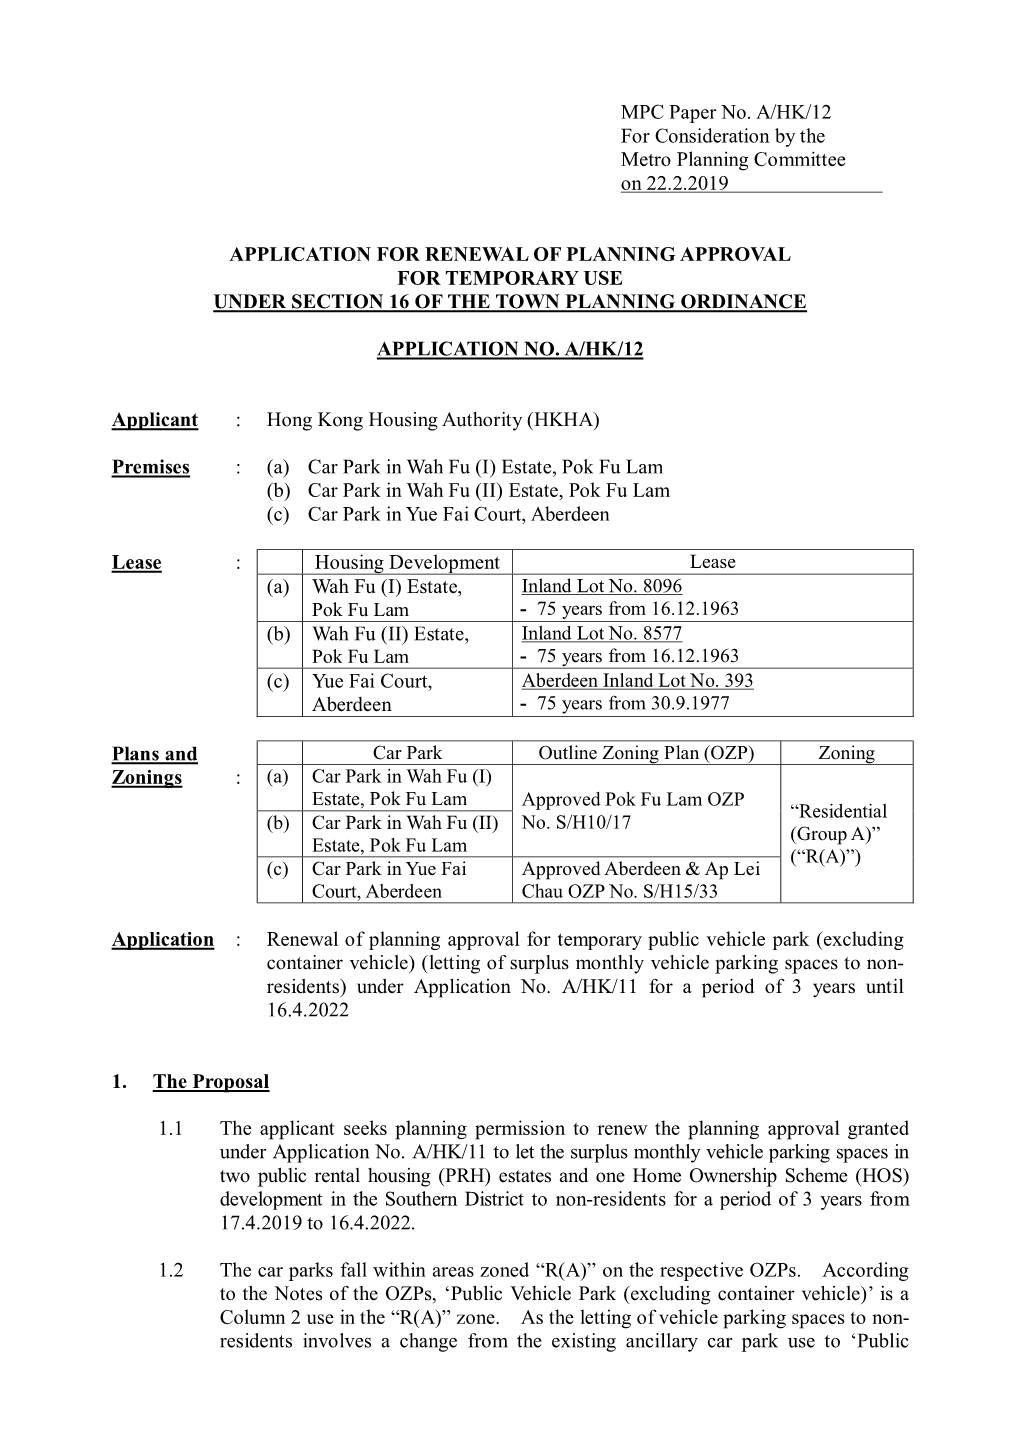 MPC Paper No. A/HK/12 for Consideration by the Metro Planning Committee on 22.2.2019